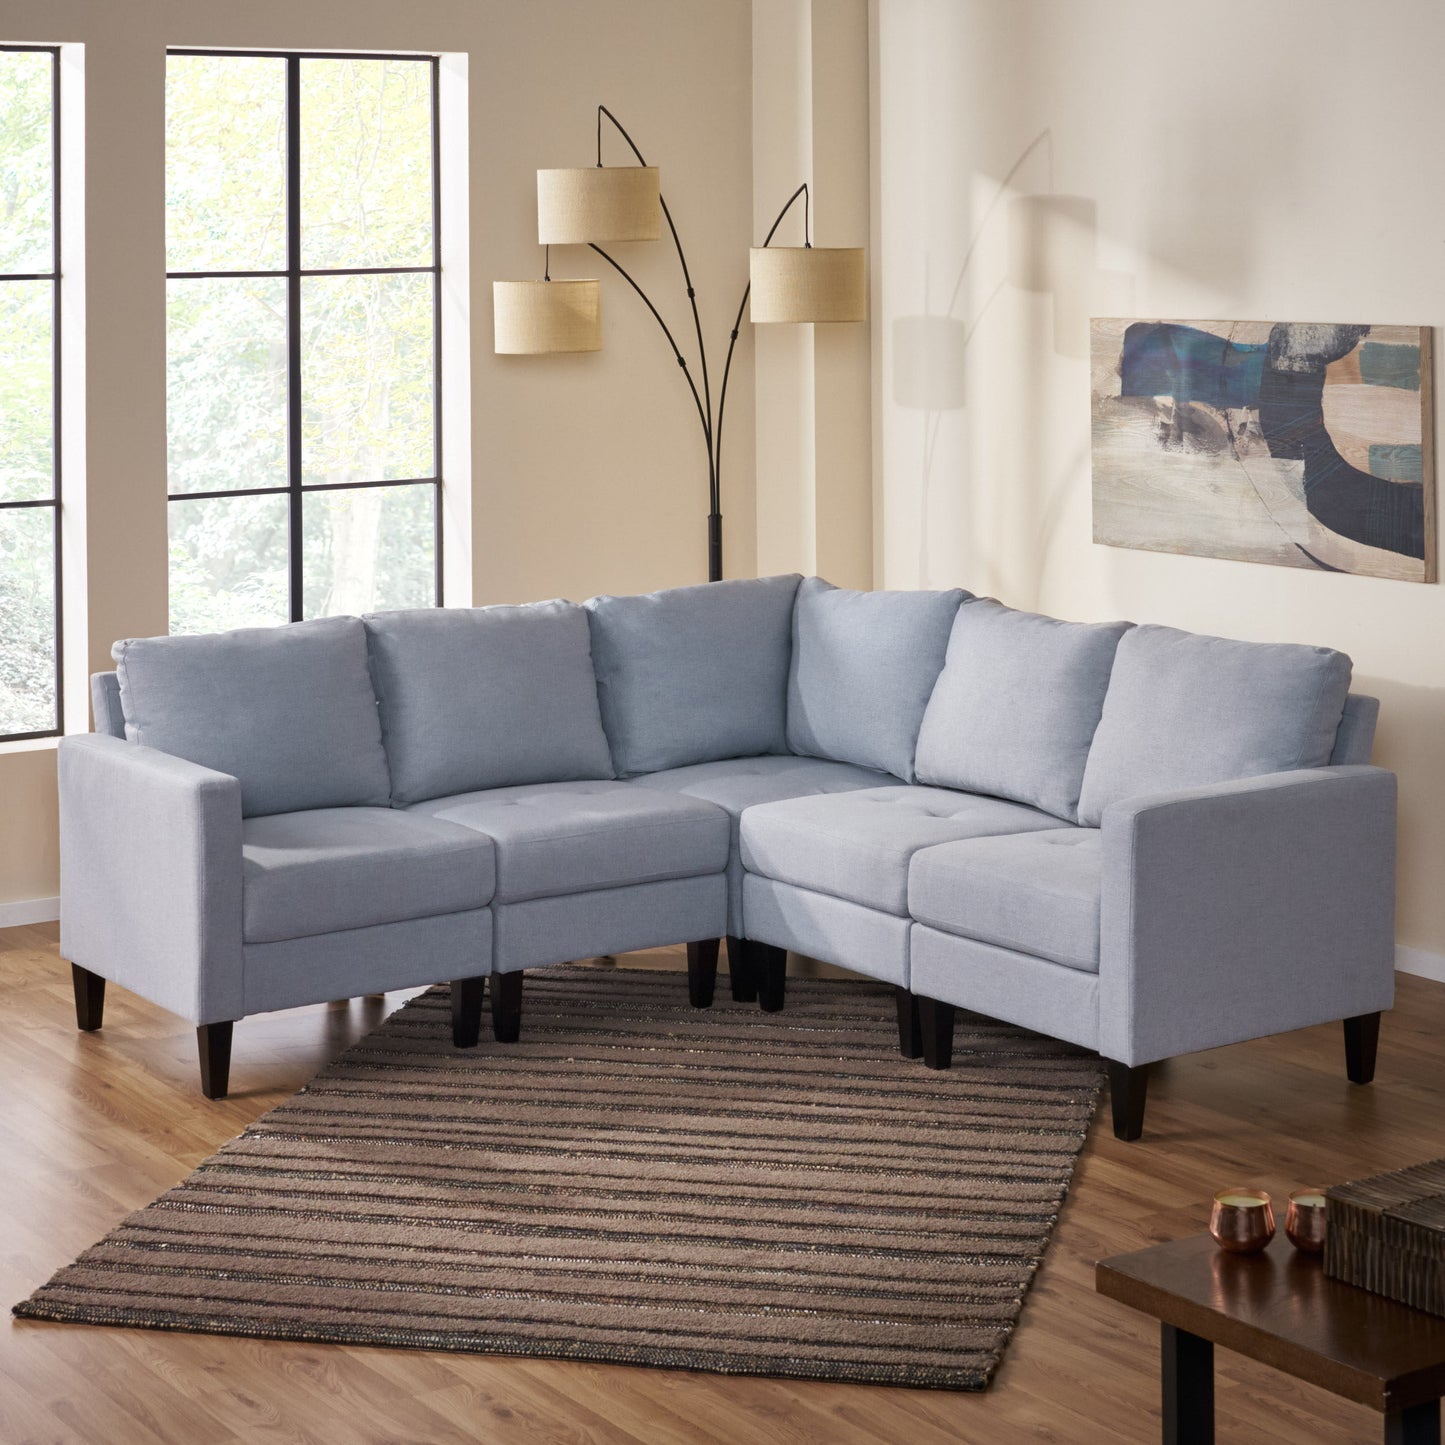 Bridger Fabric Sectional Couch